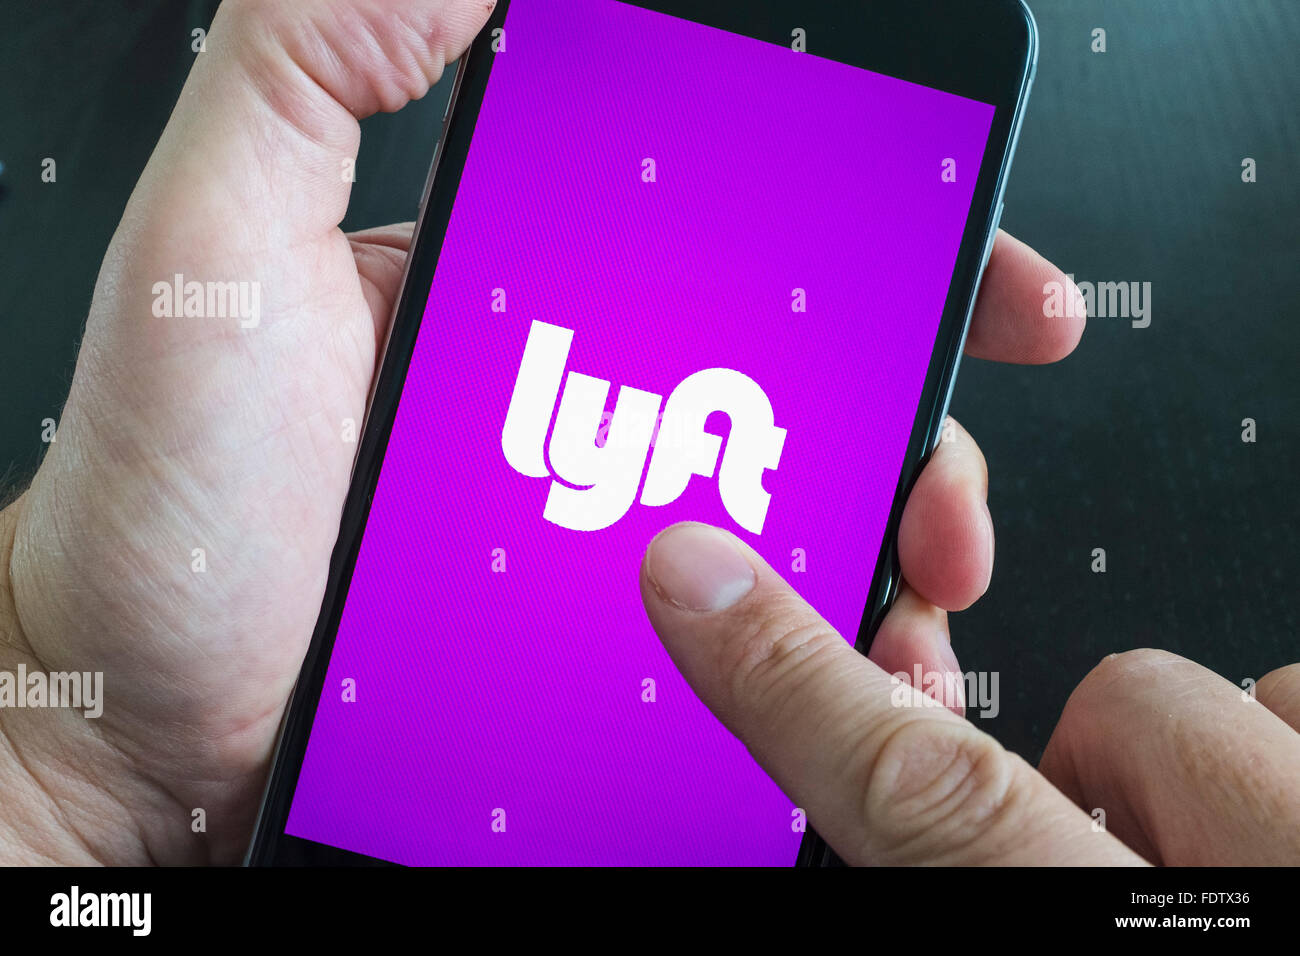 Lyft online taxi booking app logo on screen of smart phone Stock Photo